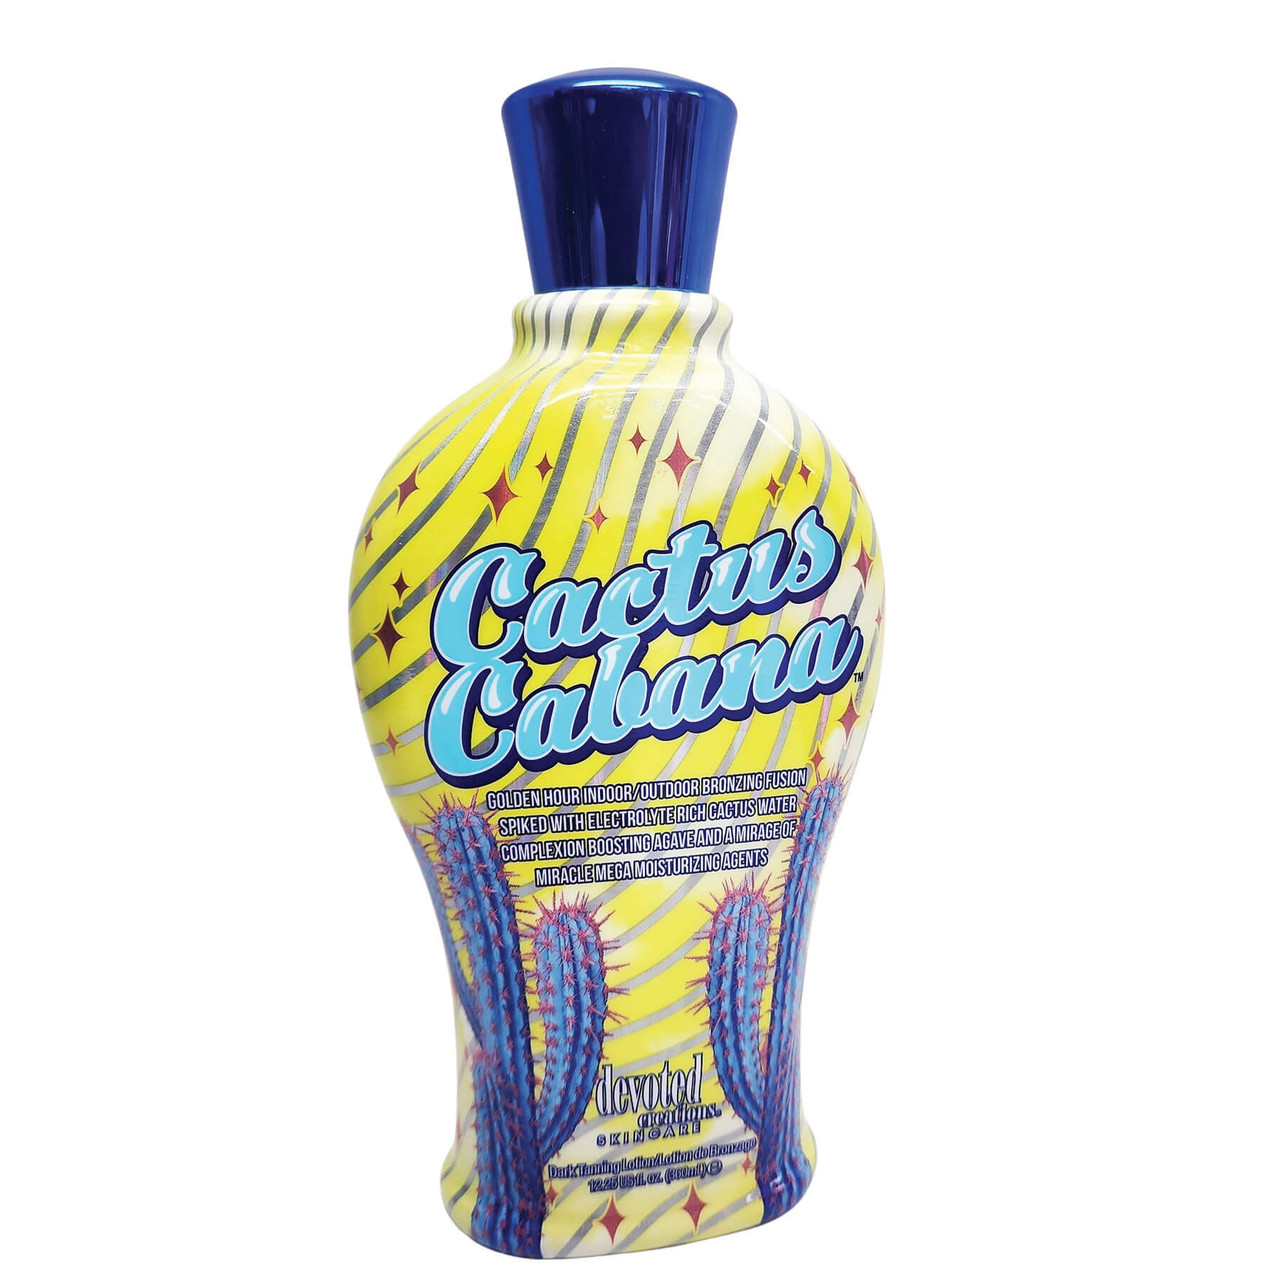 Devoted Creations Cactus Cabana Bronzing Fusion Spiked Bronzer